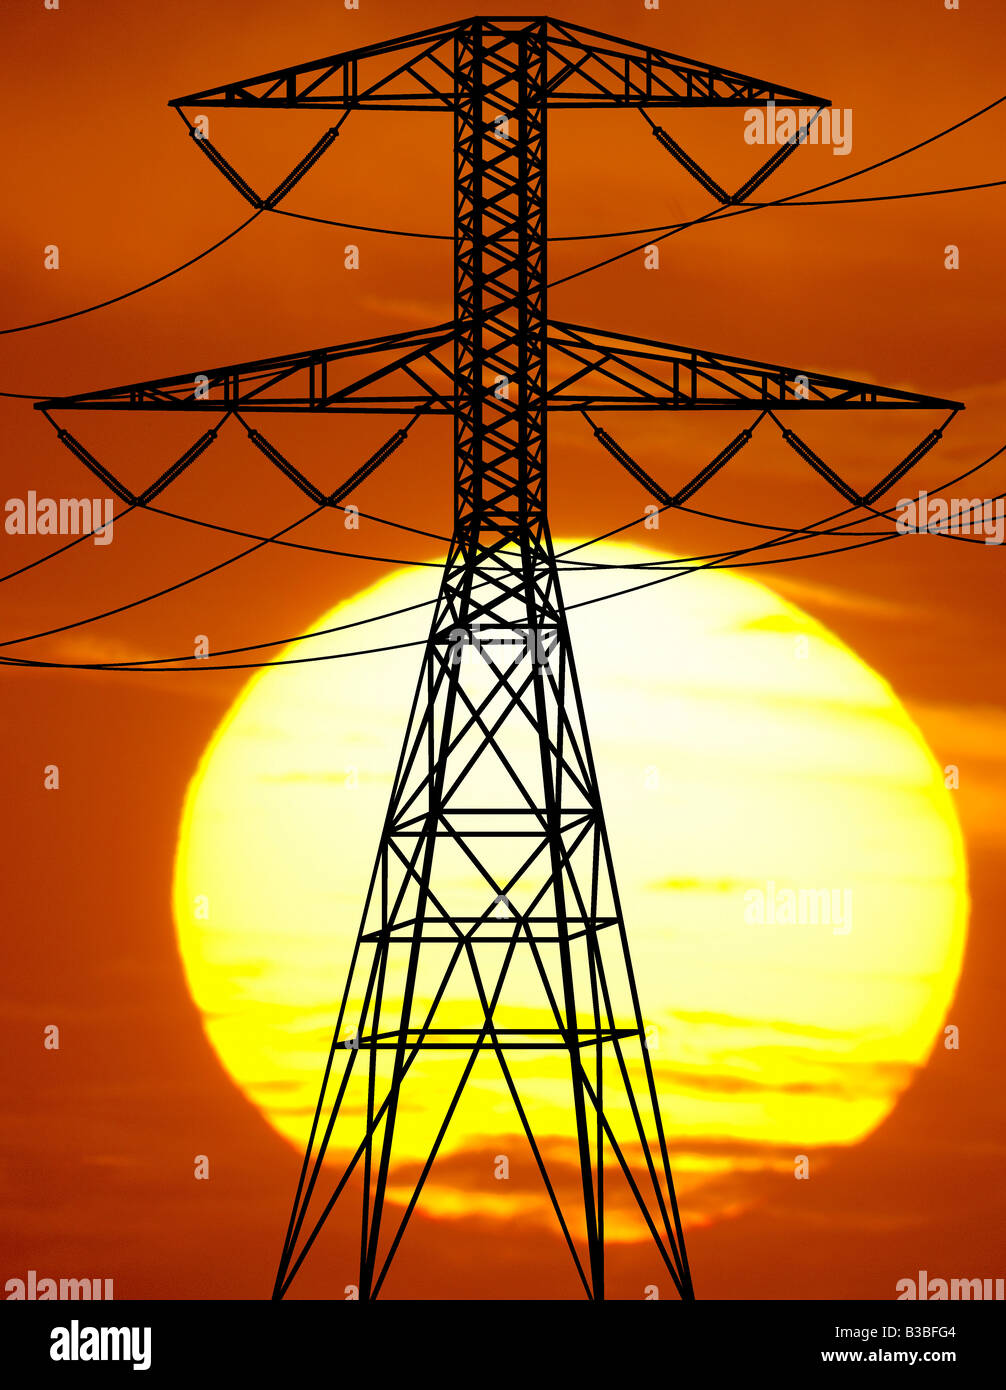 transmission power line tower at sunset Stock Photo